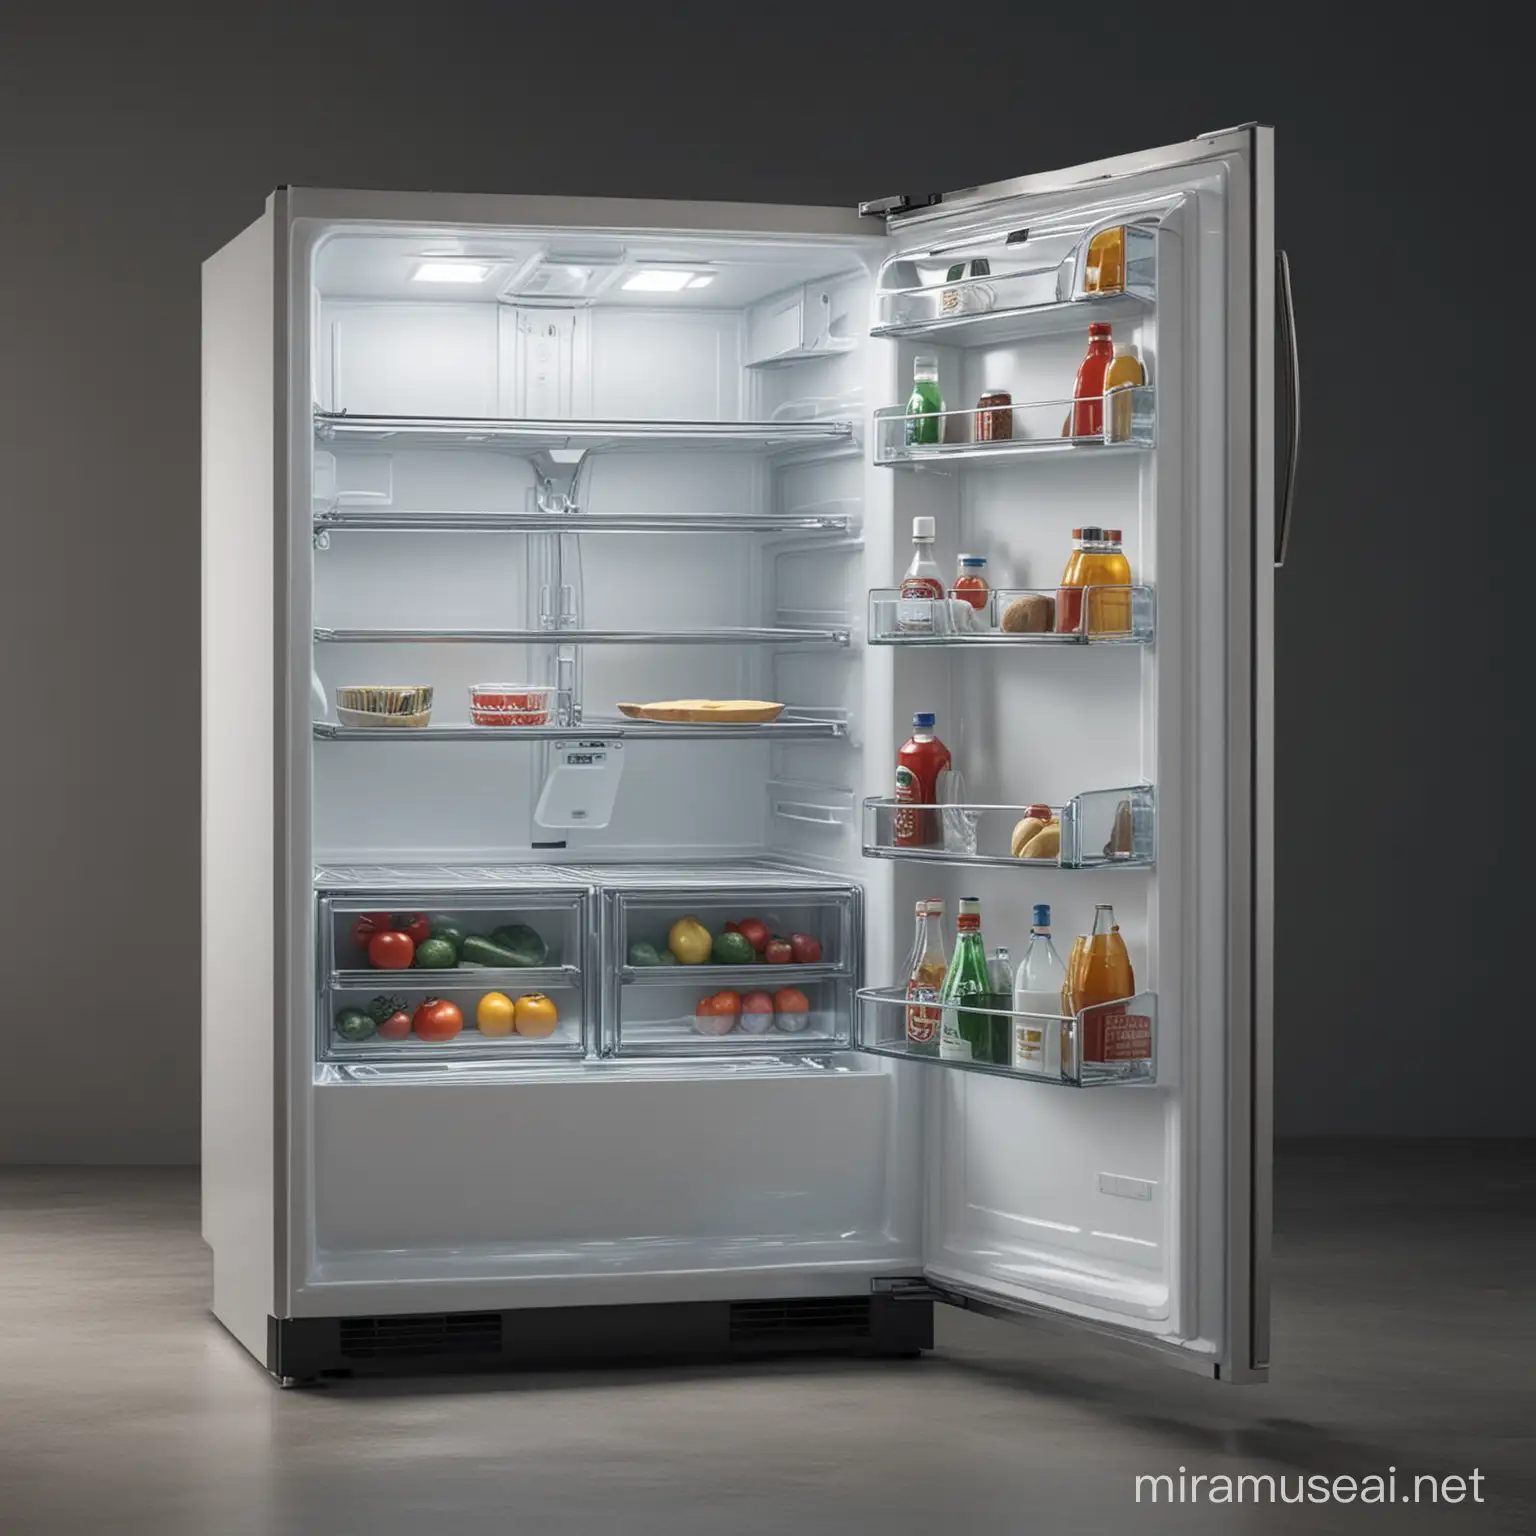 full frontal view of the open absolutely empty photorealistic refrigerator in the night kitchen